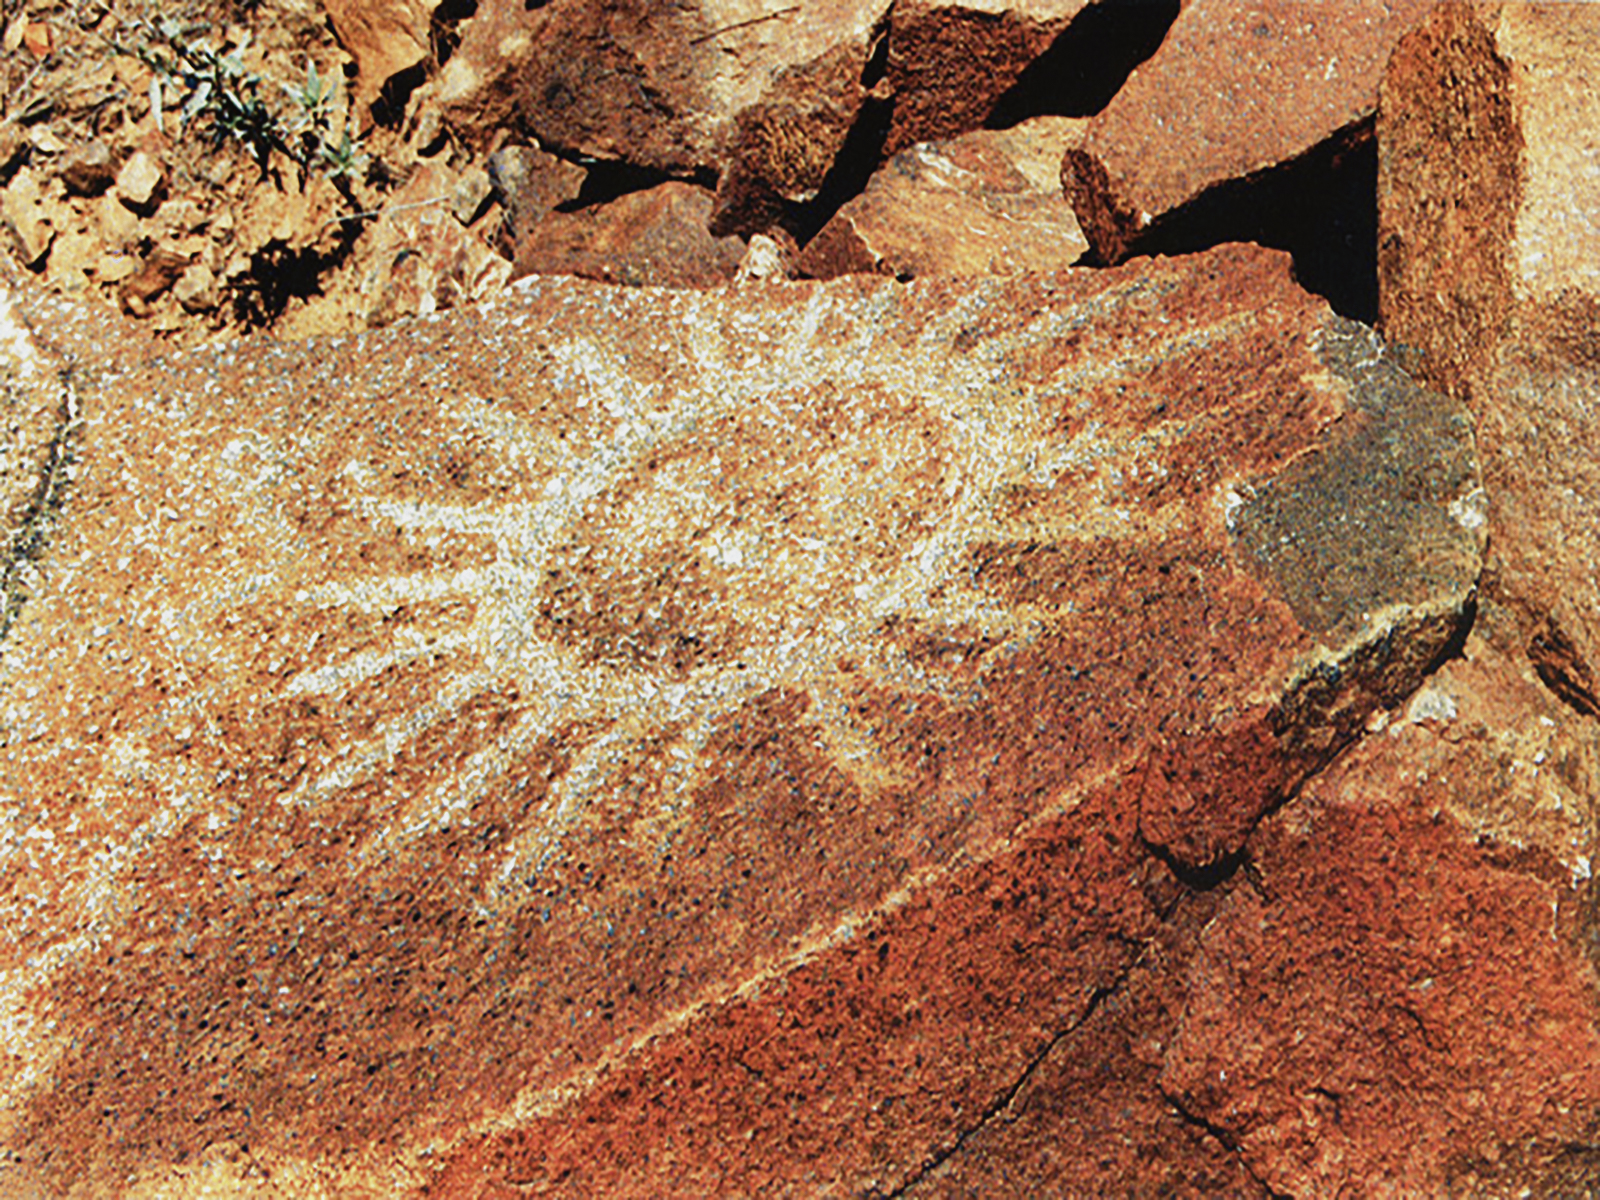 Petroglyph from the Archaological site of Checta